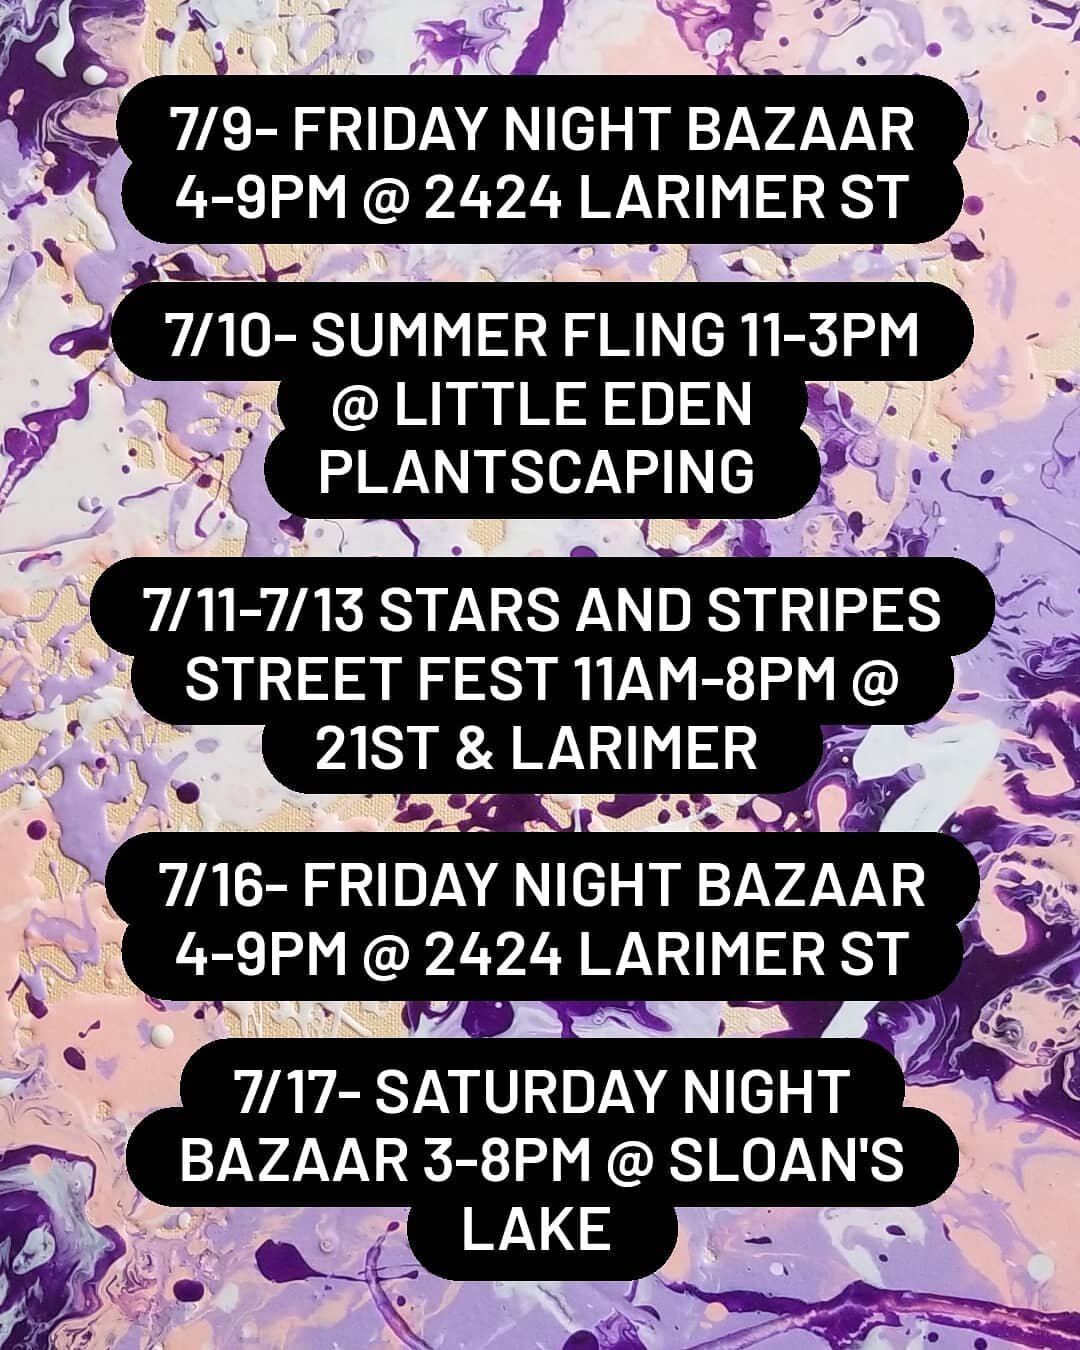 Upcoming market schedule 😊 Come check out some new color palettes! 🎨